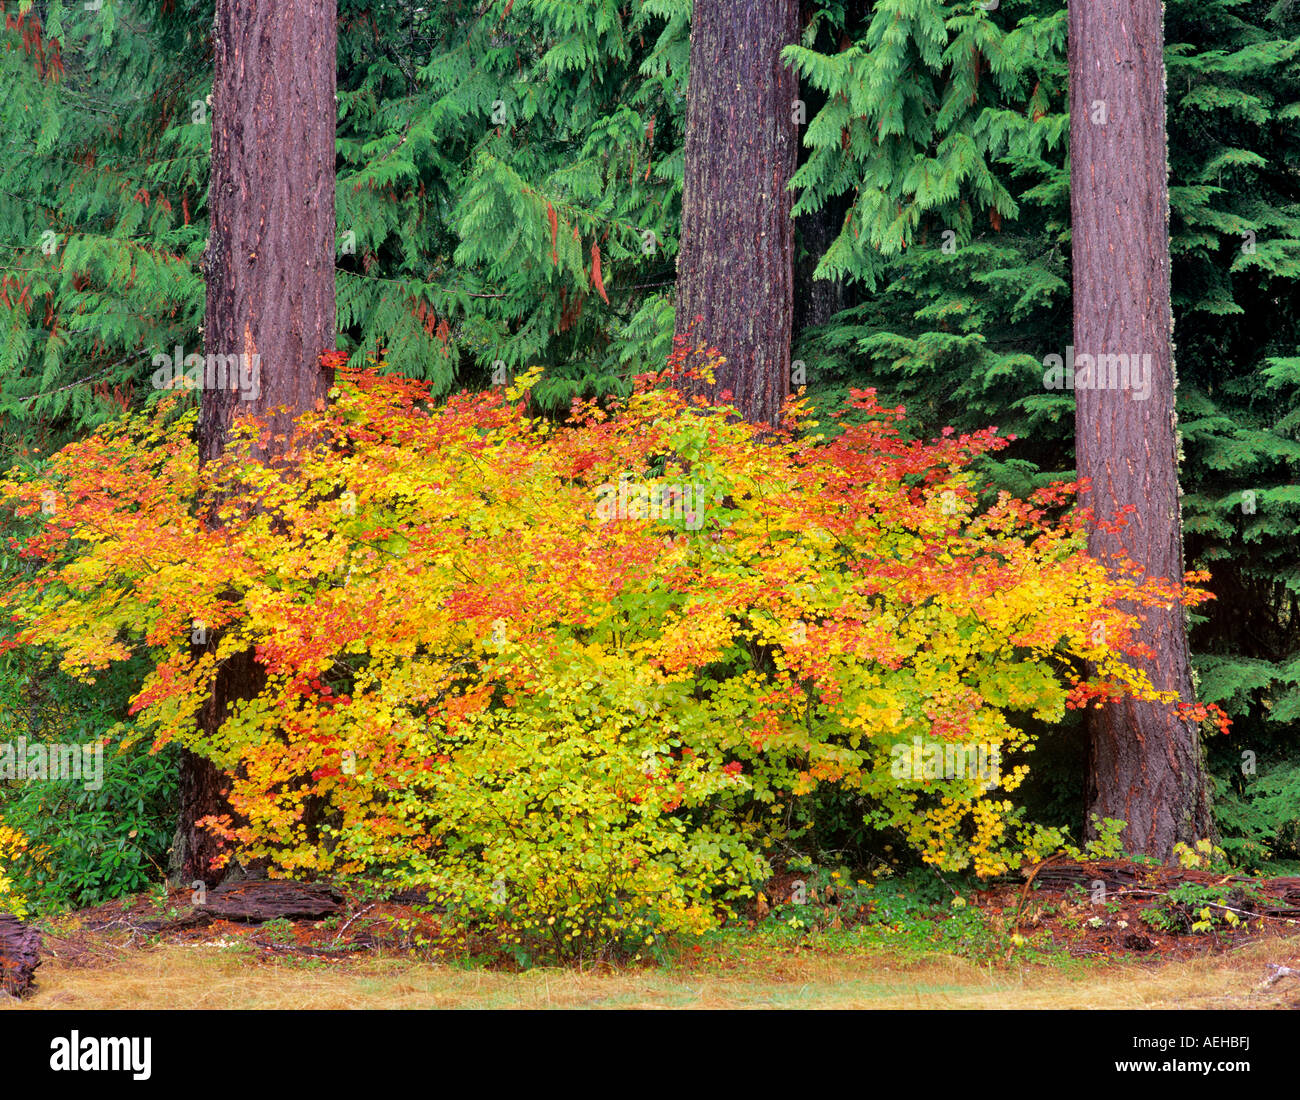 Fall color in Vine Maple and Cedar trees off Aufderheide National Scenic Byway Oregon Stock Photo